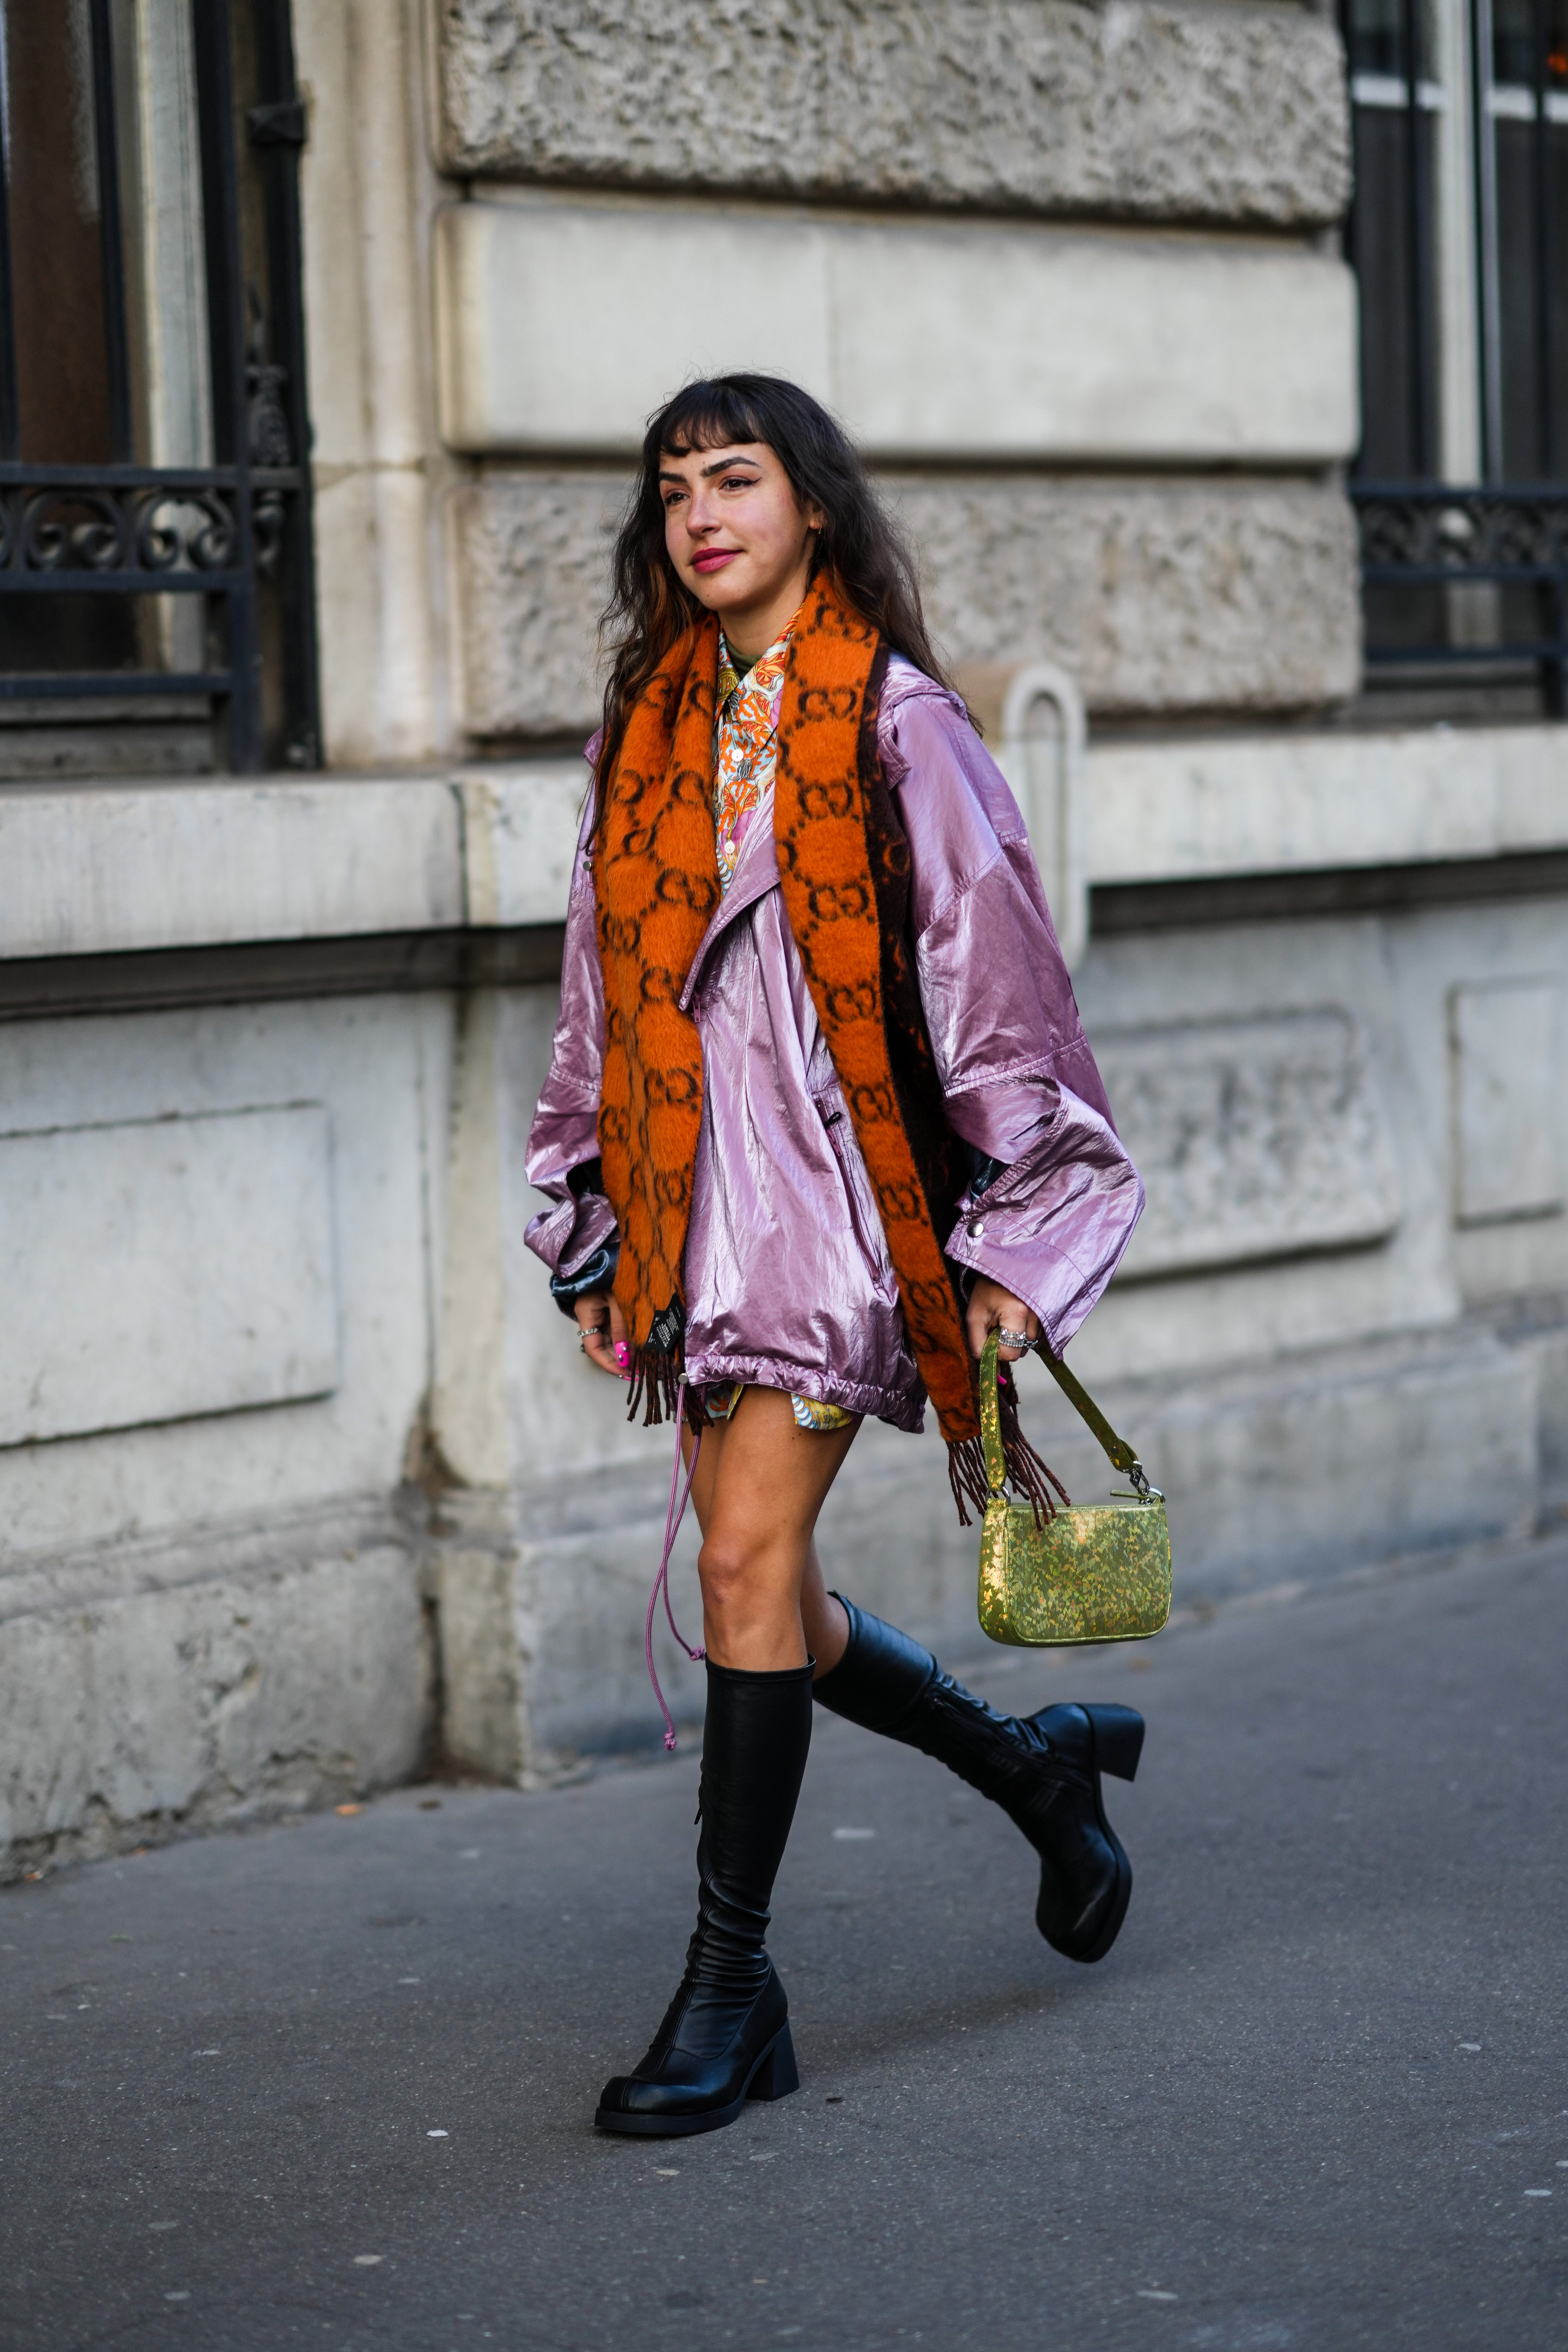 The Micro Miniskirt Is Taking Over the Streets of Paris RN | Who What Wear